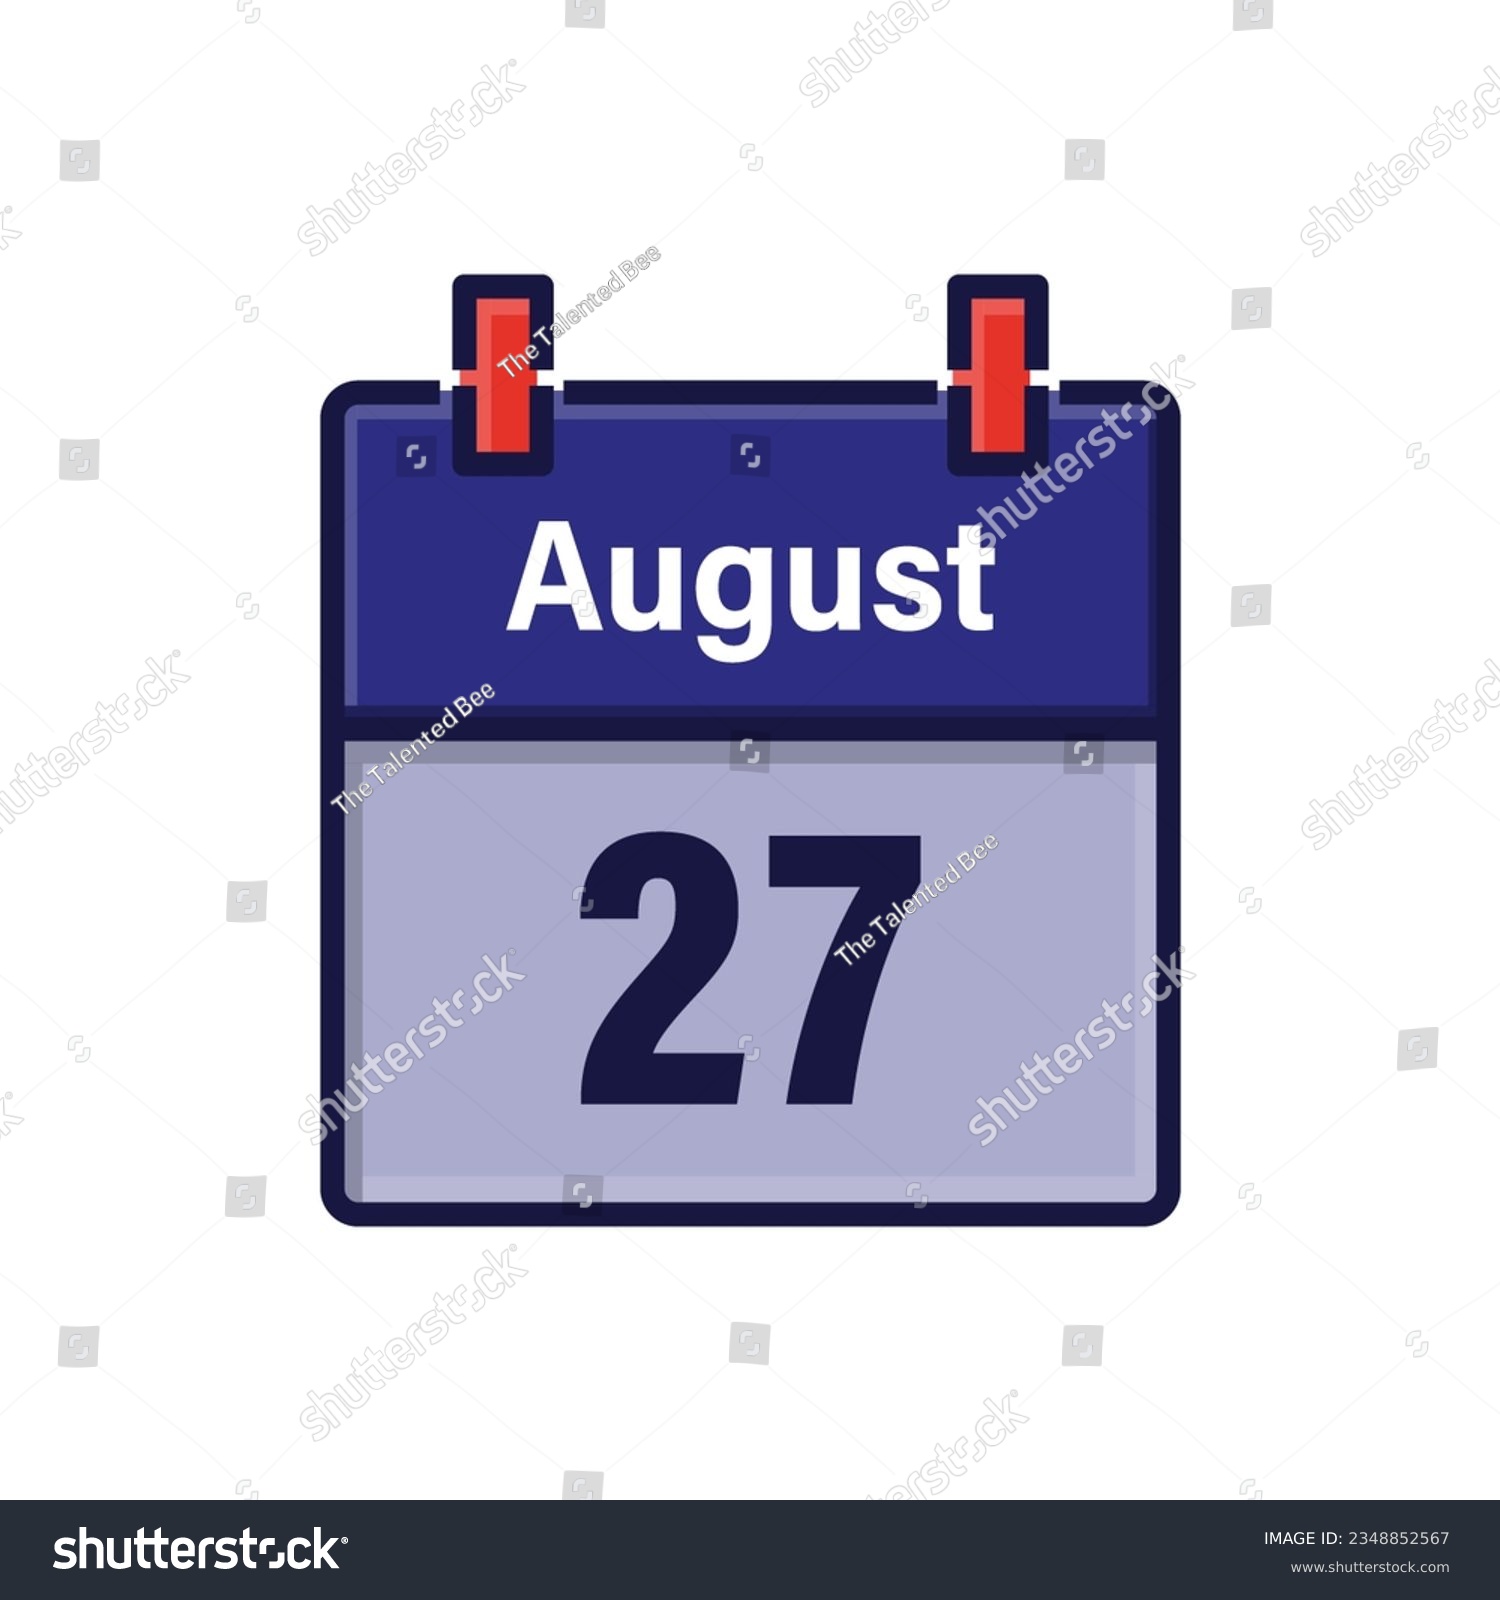 SVG of August 27, Calendar icon. Day, month. Meeting appointment time. Event schedule date. Flat vector illustration. svg